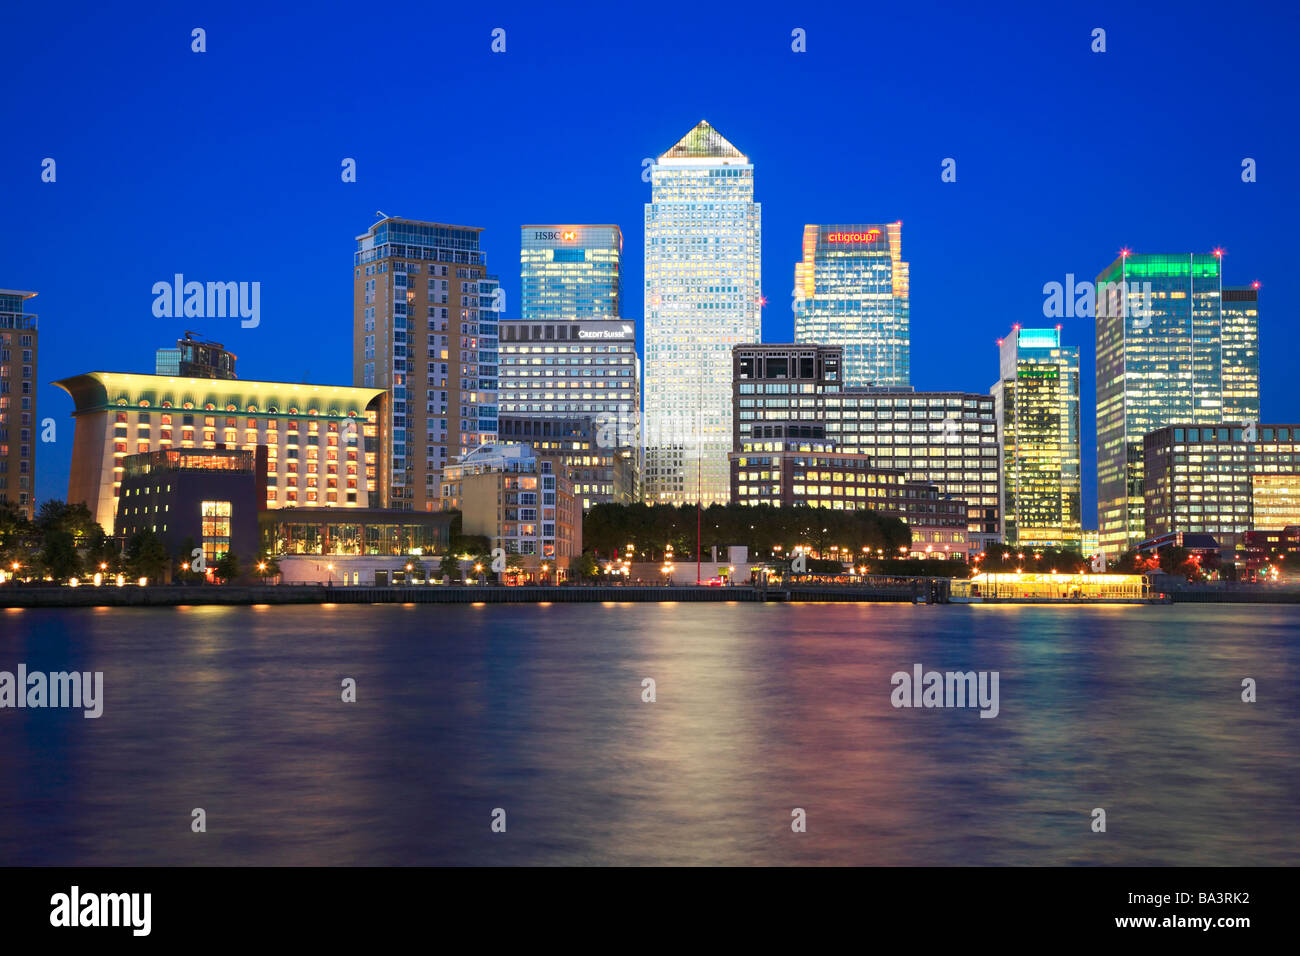 Canary Wharf at Night across the River Thames. Stock Photo